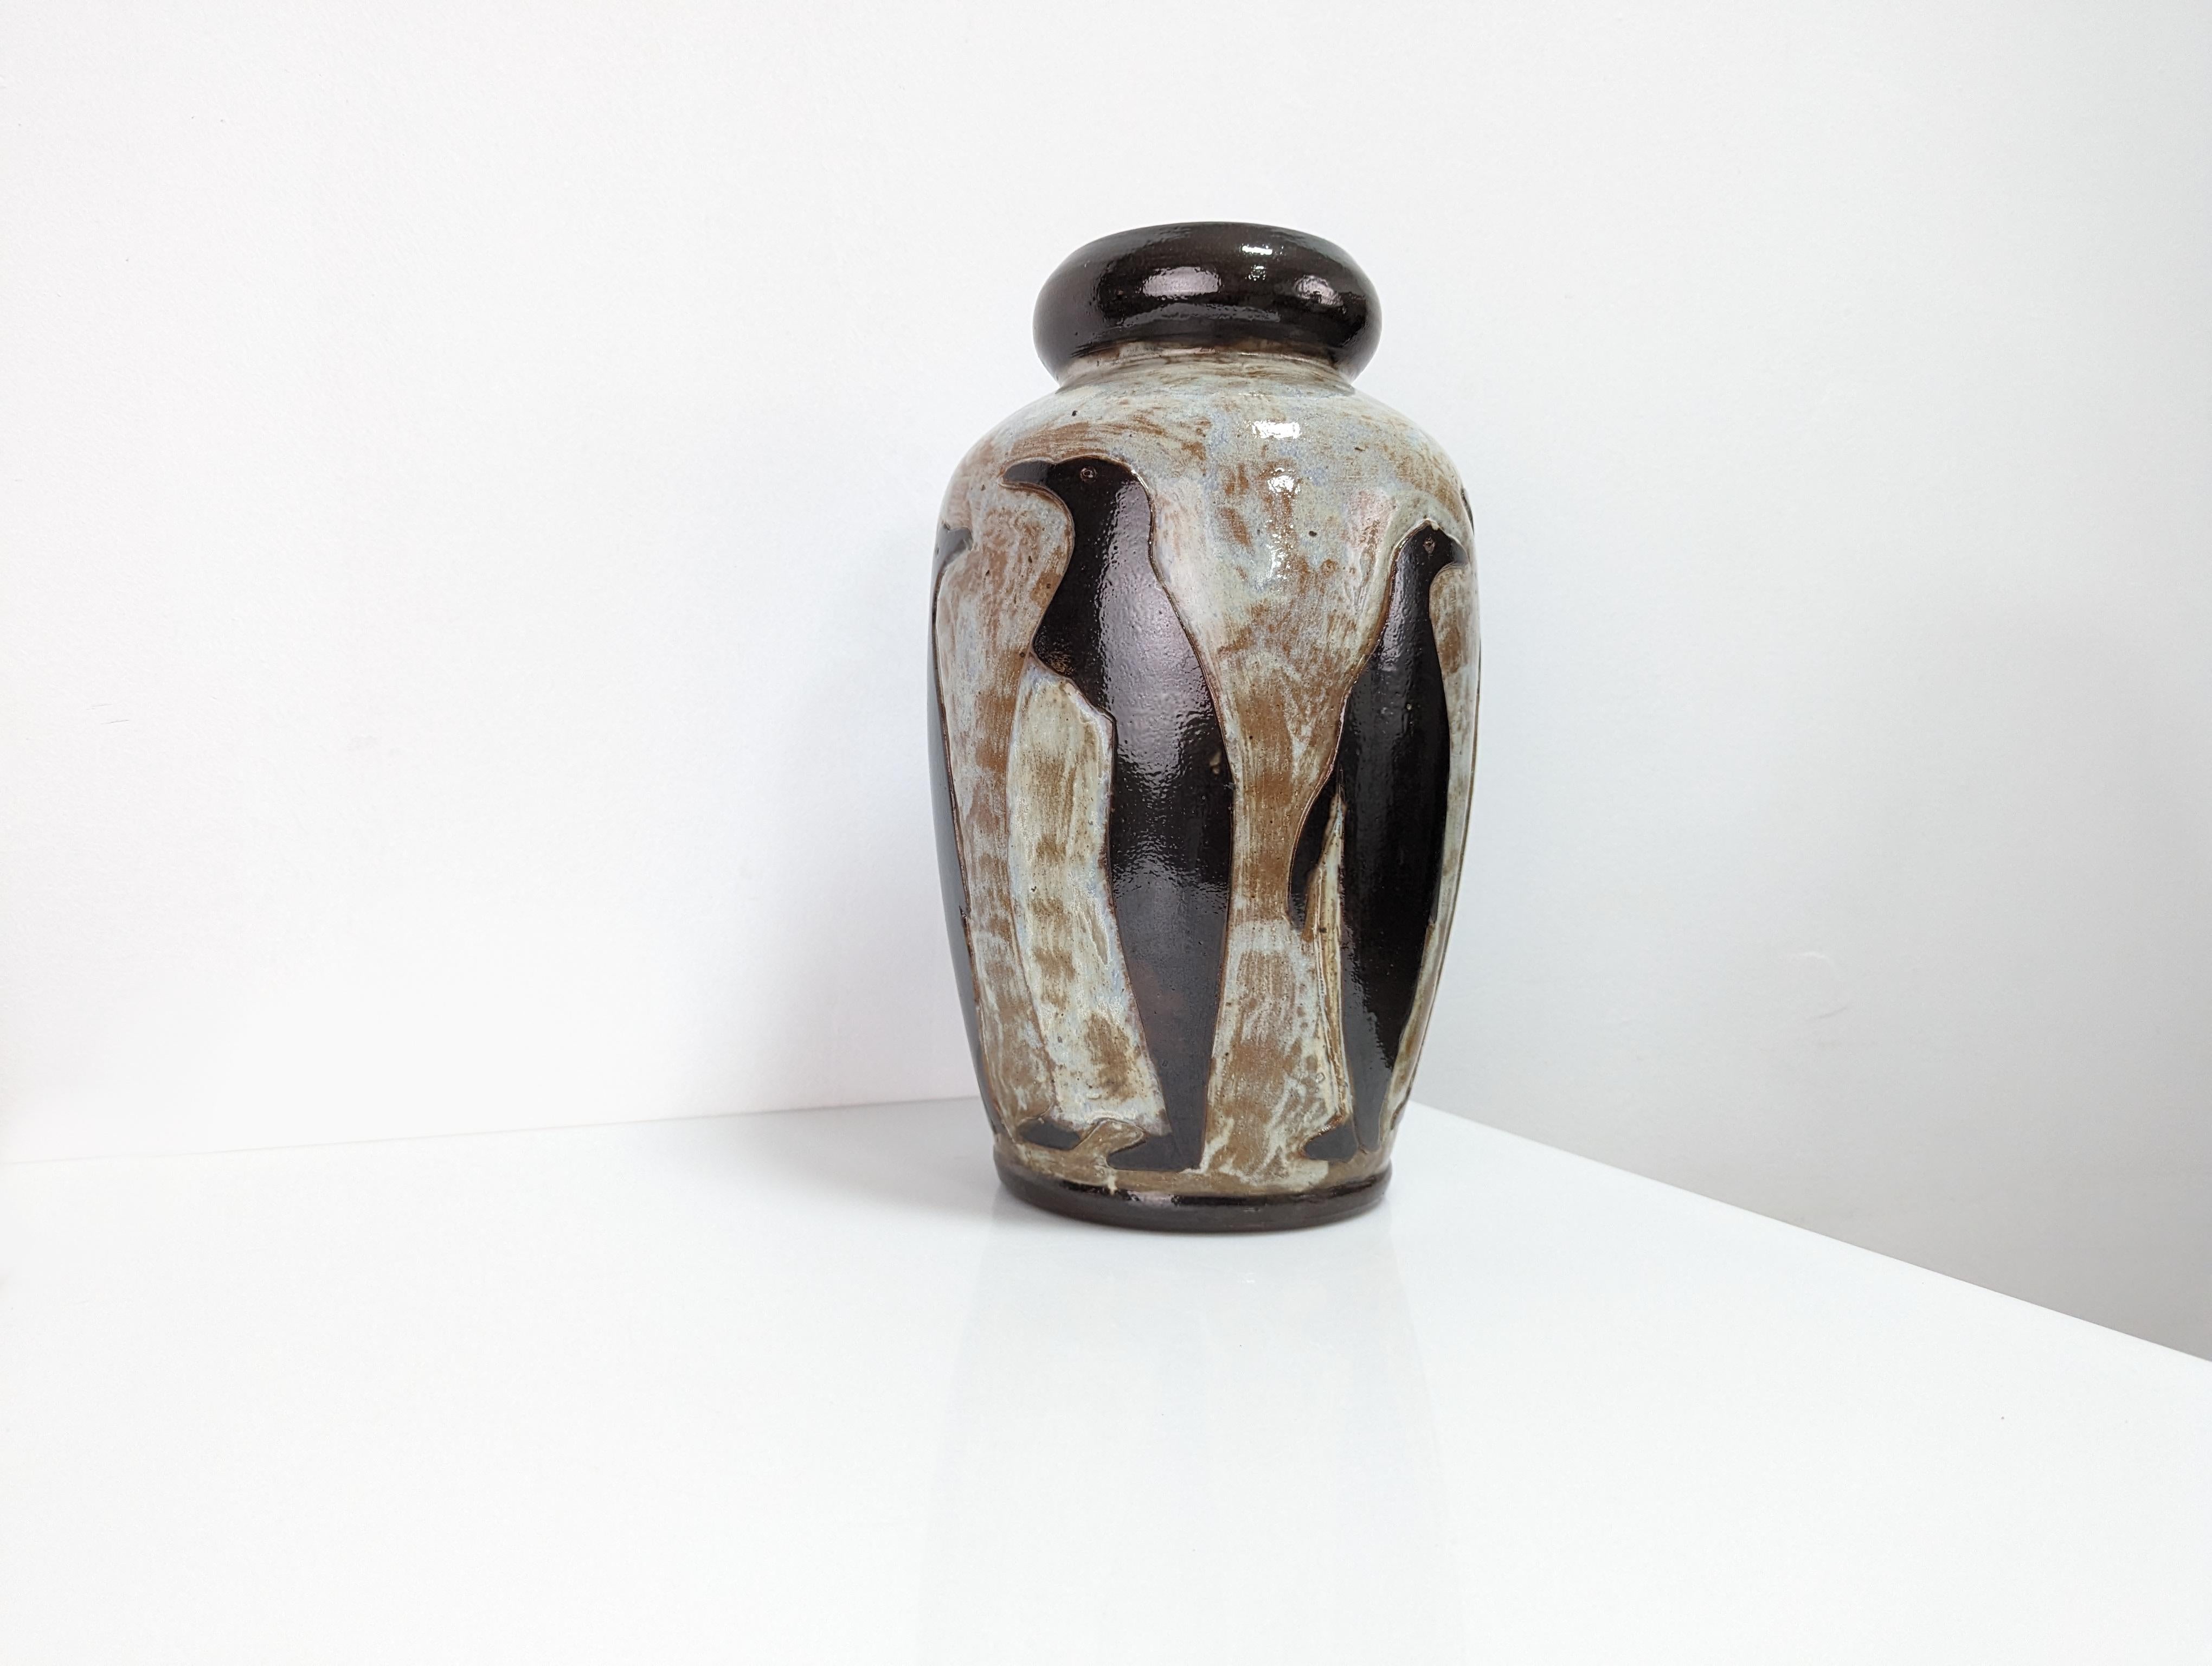 Mid-20th Century Art Deco Penguin Vase by Roger Guerin for Armogres, Belgium 1930s For Sale